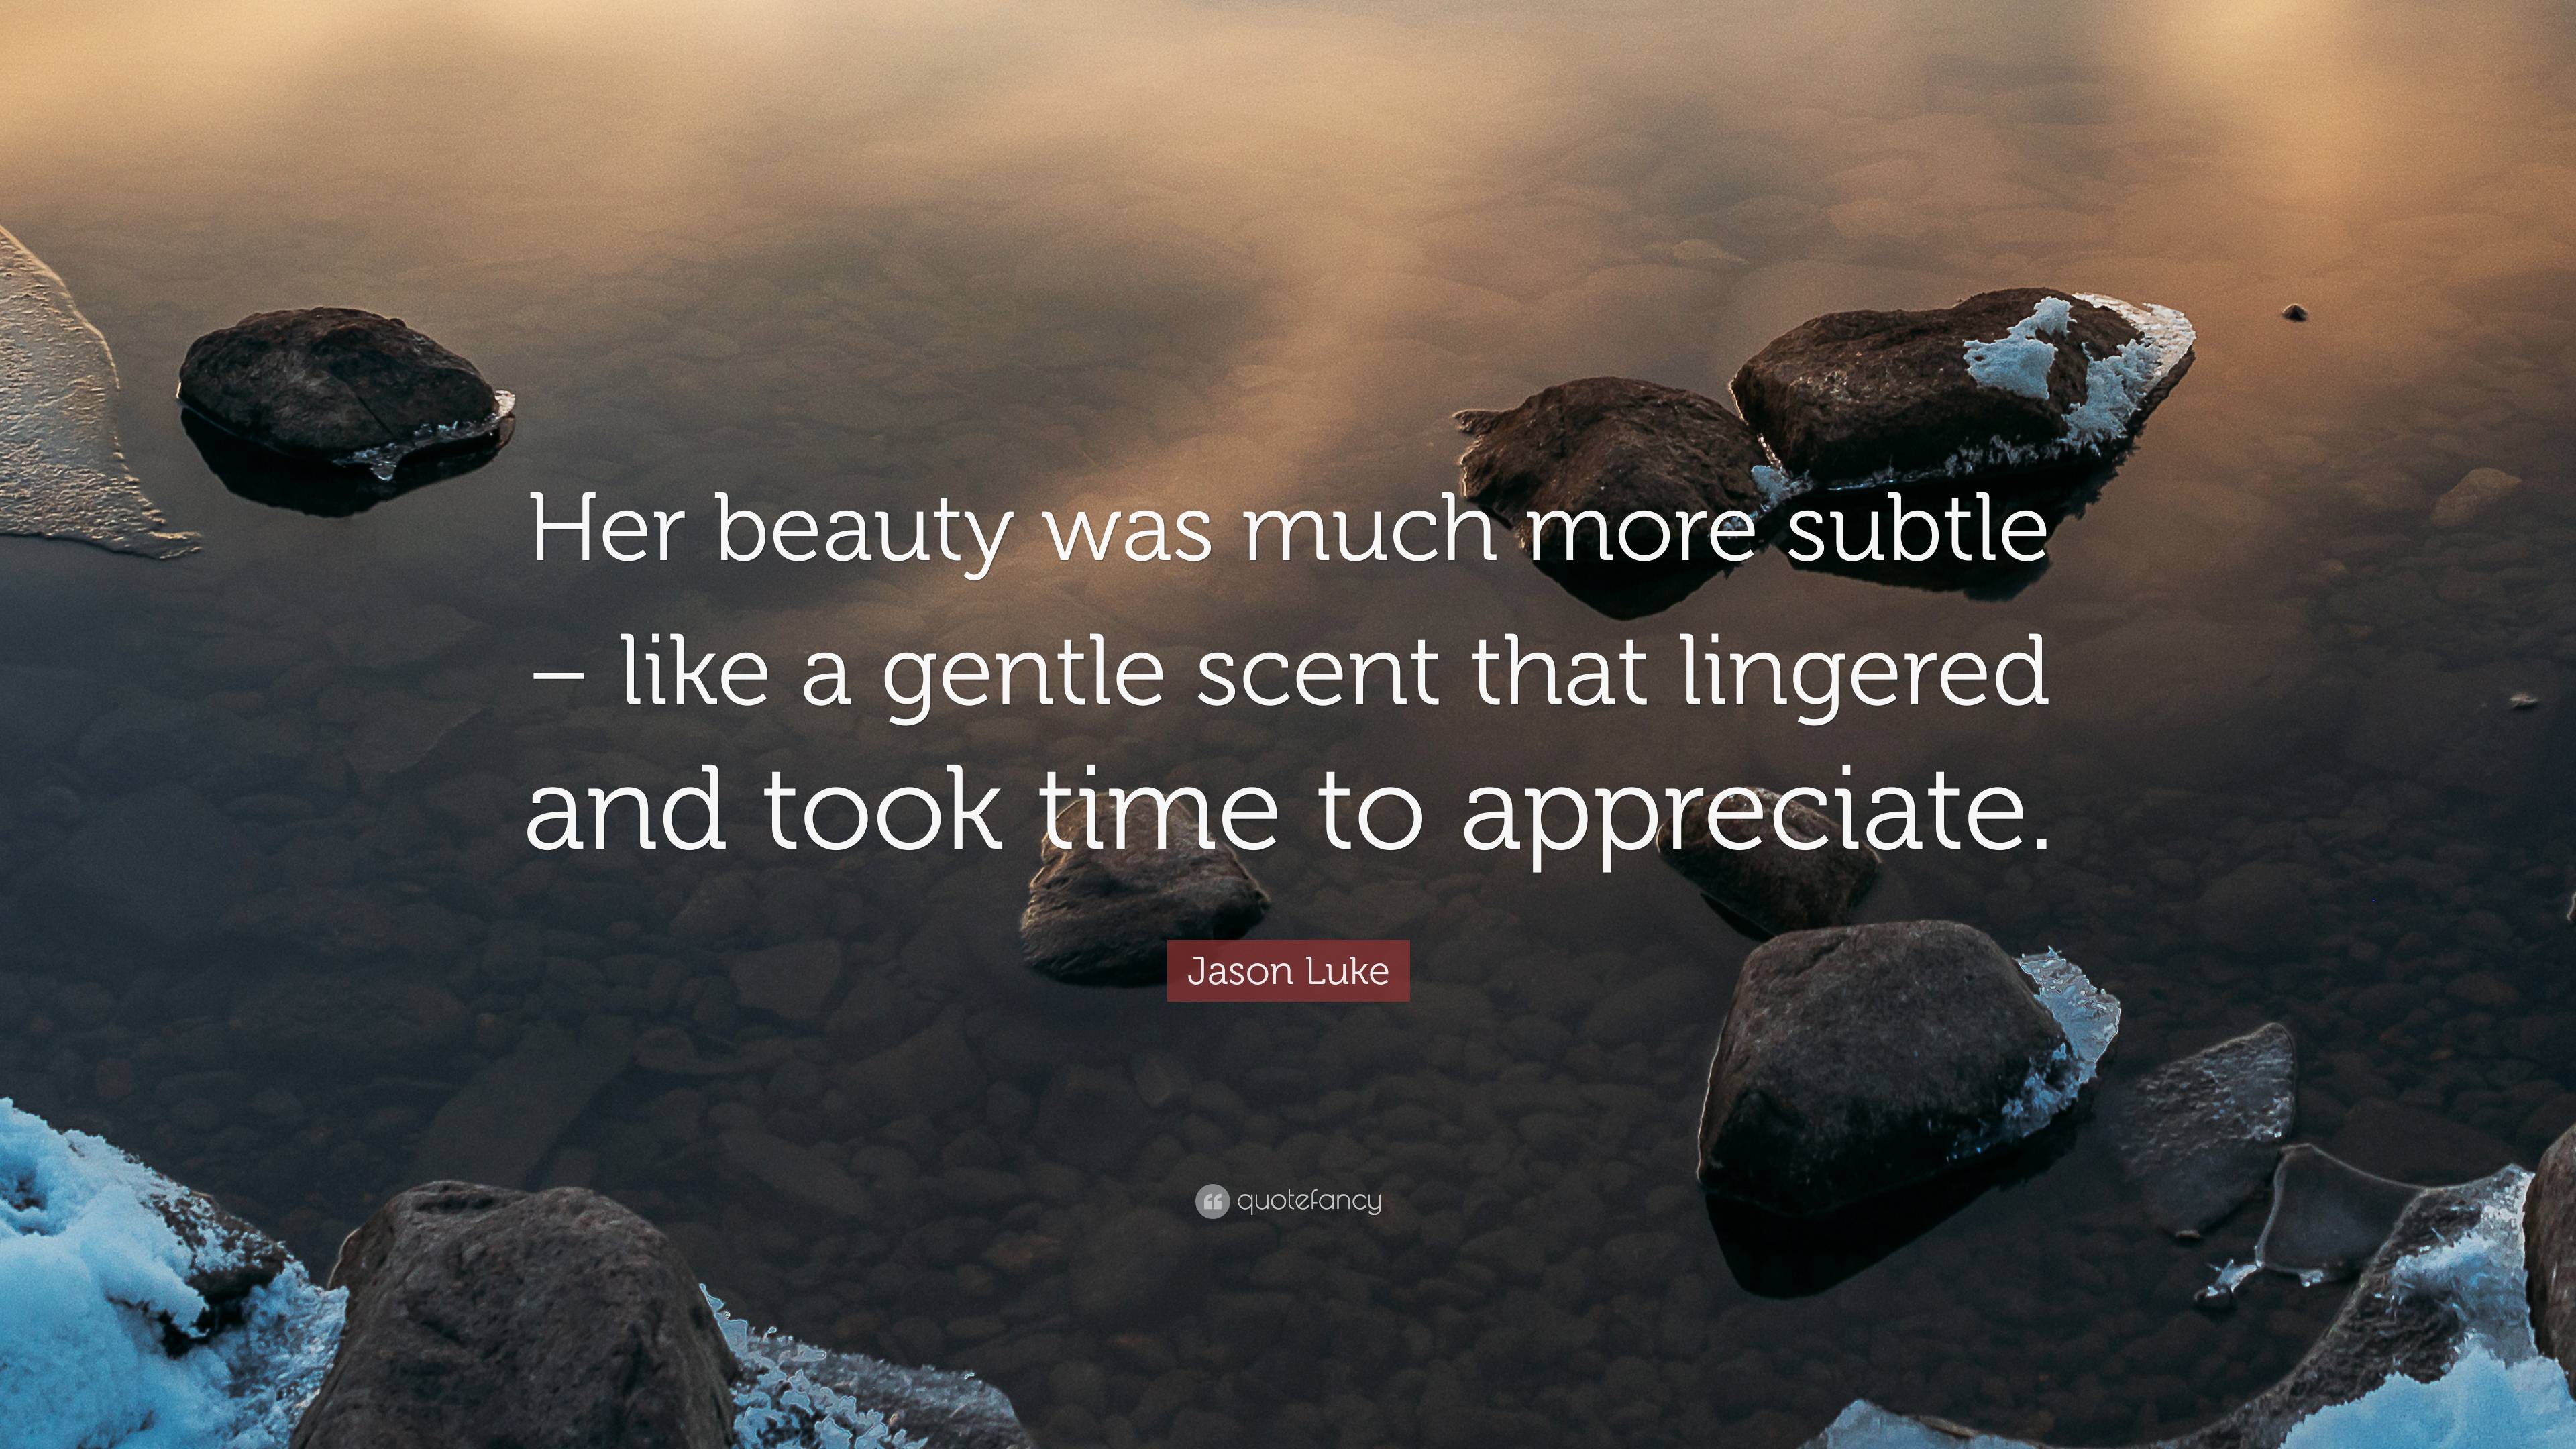 Jason Luke Quote: “Her beauty was much more subtle – like a gentle scent  that lingered and